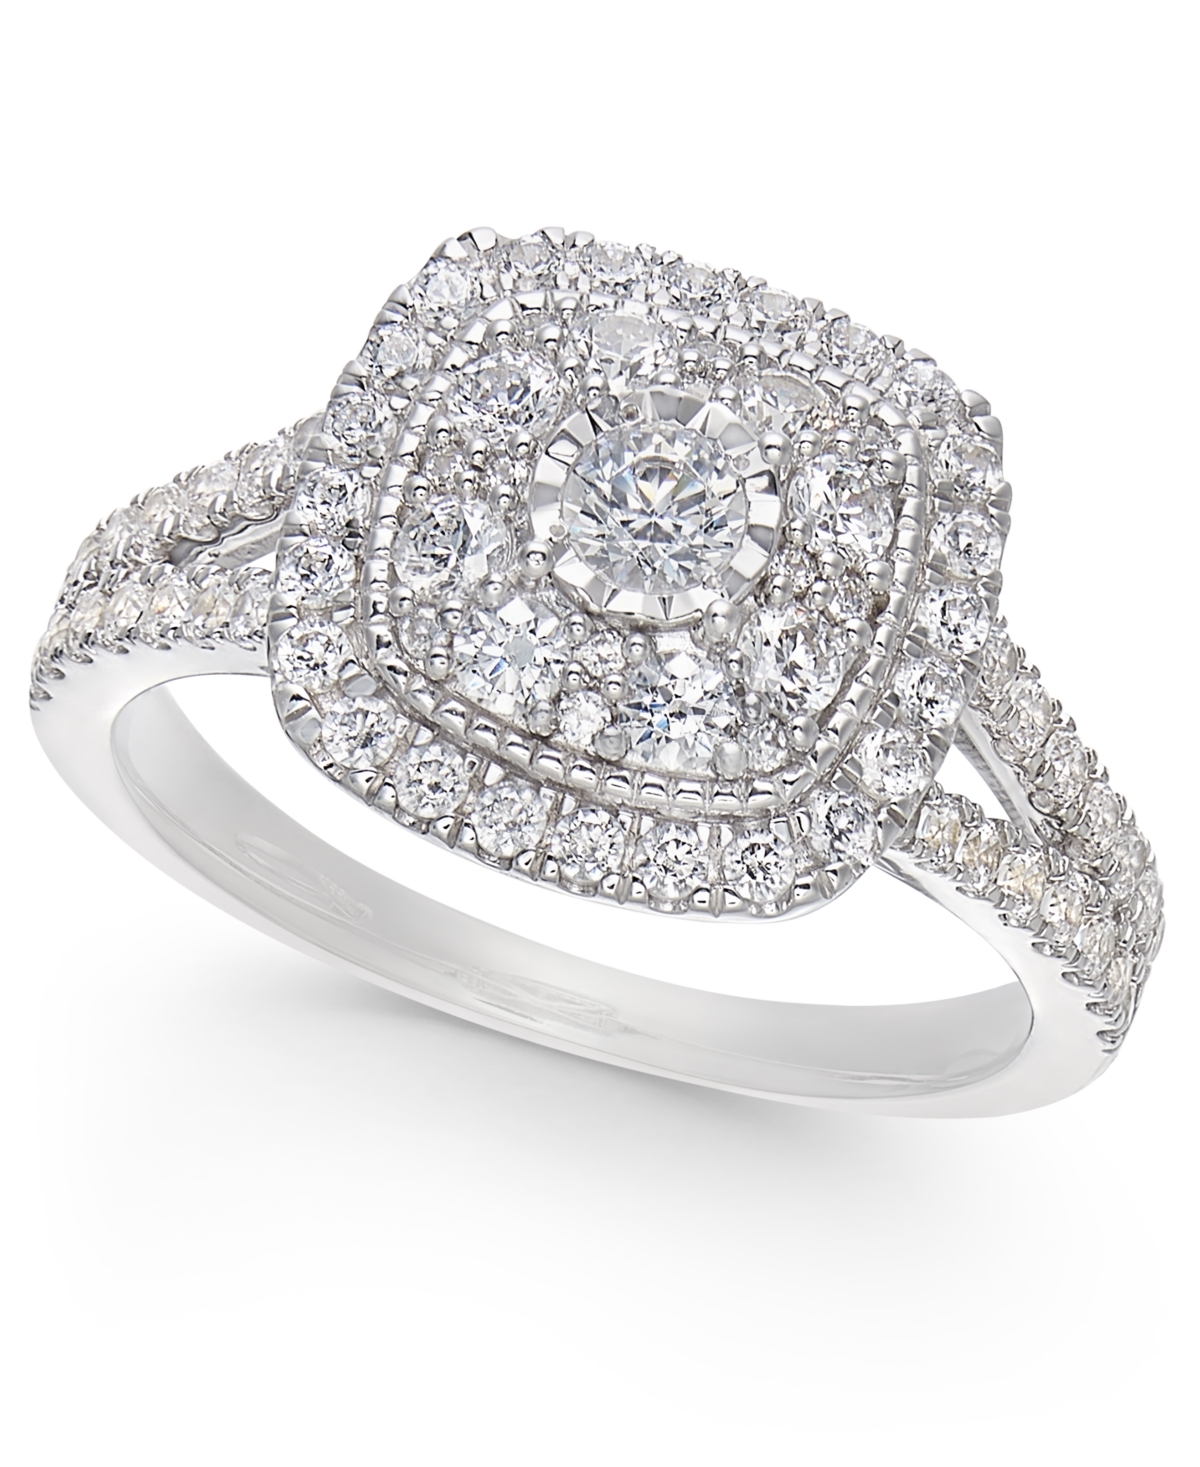 Diamond Multi-Layer Square Halo Engagement Ring (1 ct. t.w.) in 14k White Gold - White Gold